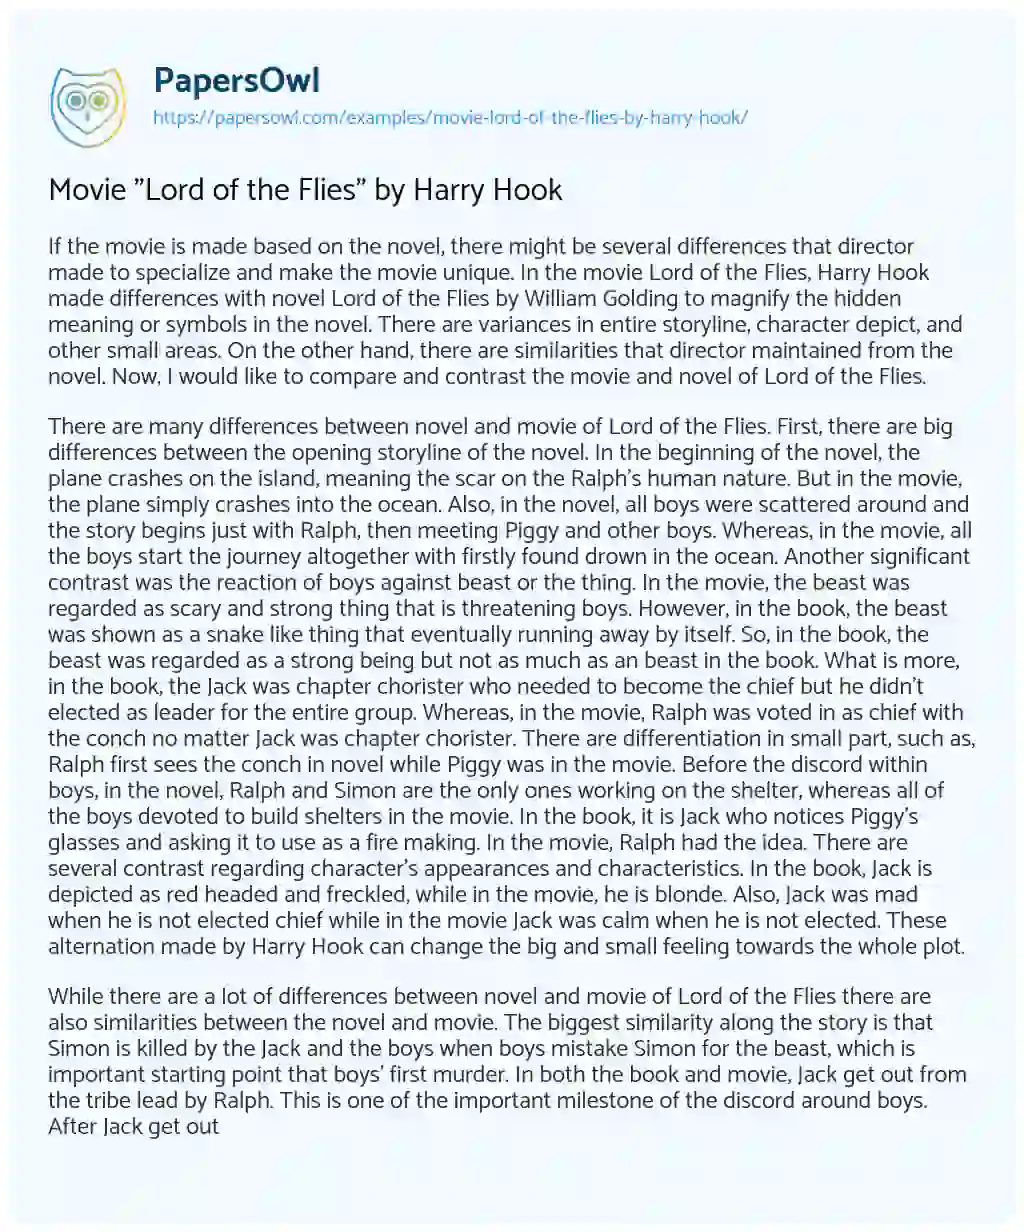 Essay on Movie “Lord of the Flies” by Harry Hook